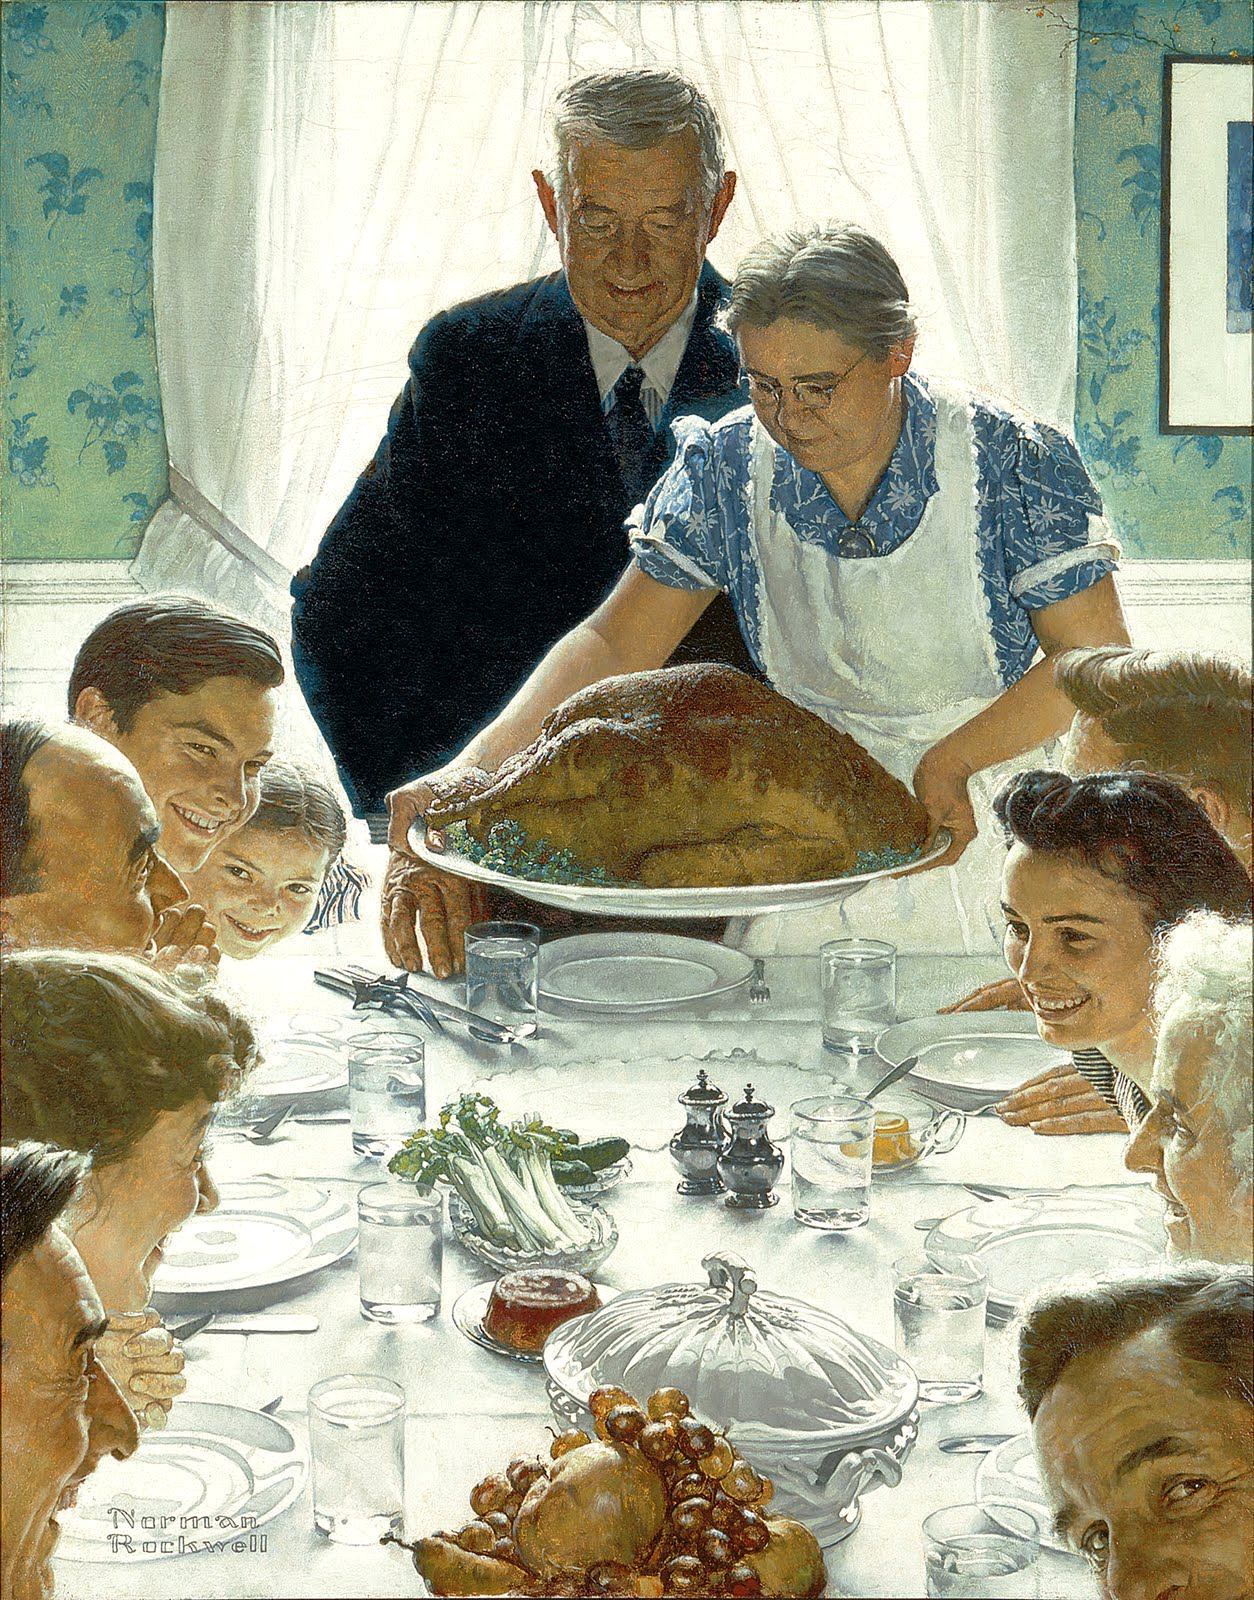 Norman Rockwell, "Freedom from Want"